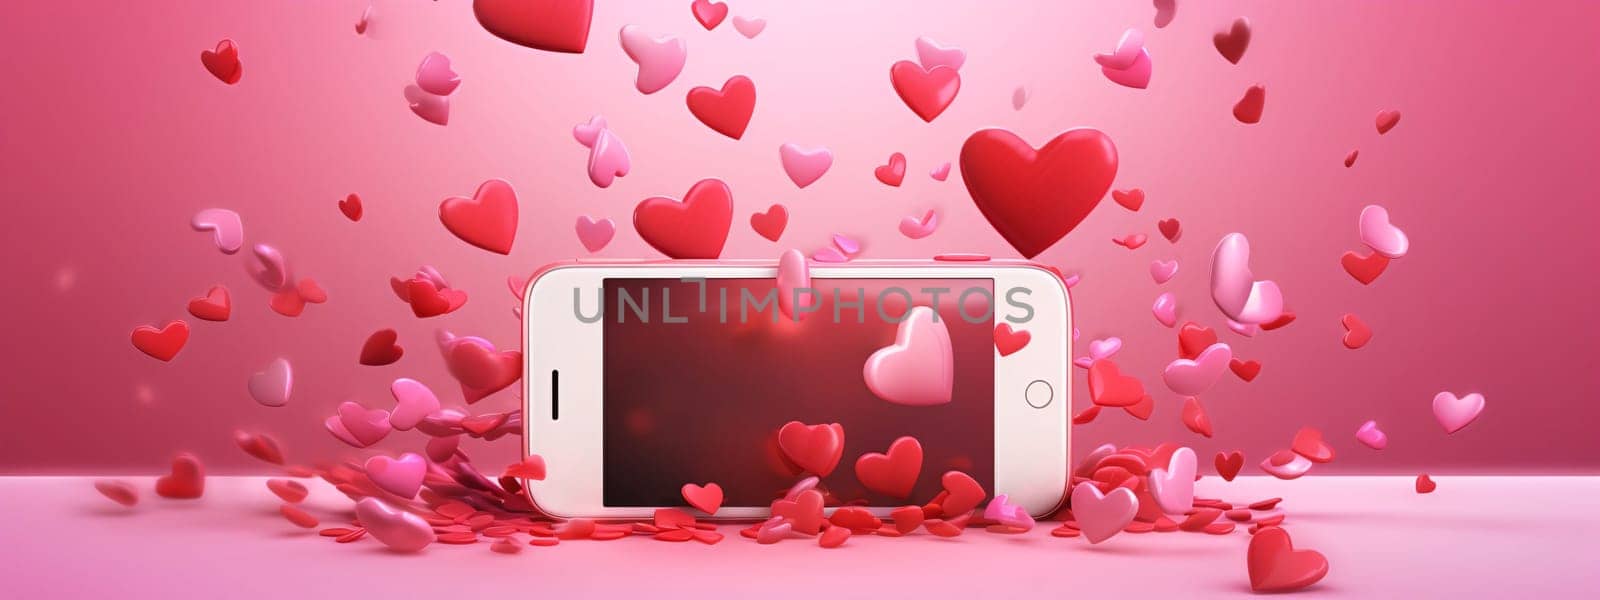 Smartphone screen: Mobile phone with red hearts flying out of the screen. 3D rendering